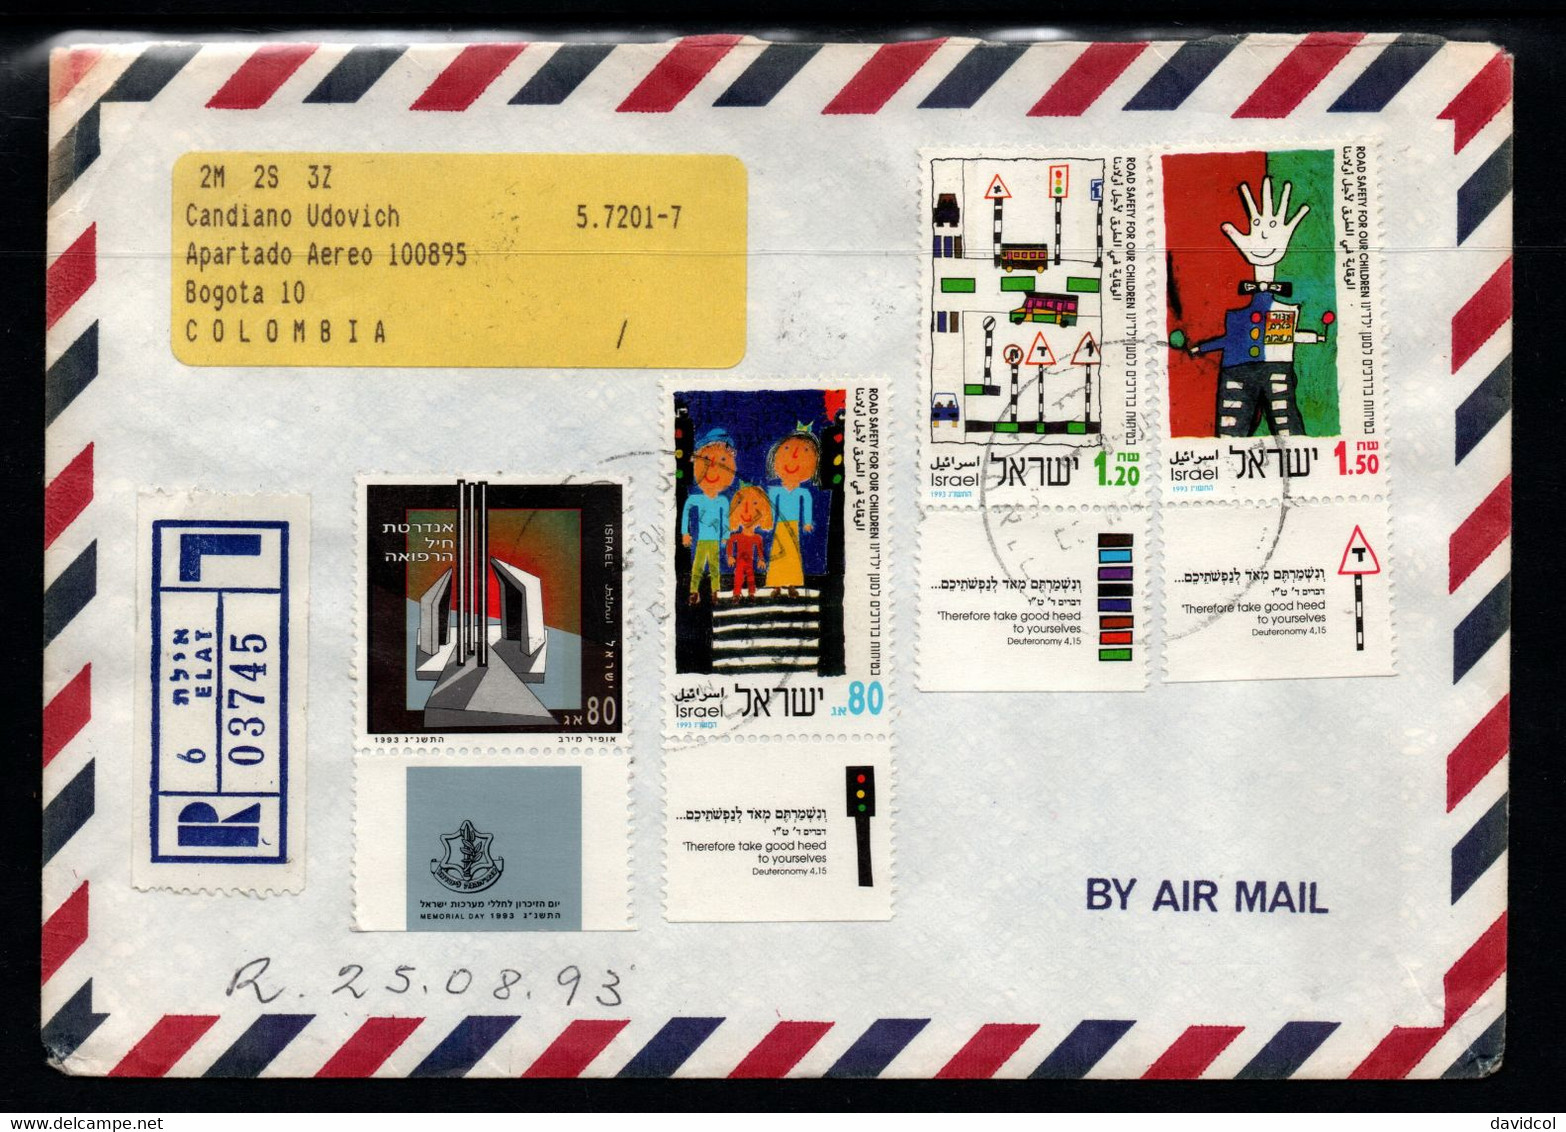 CA425- COVERAUCTION!!! - ISRAEL- ELAT  TO COLOMBIA (21-AG-93) - MEMORIAL DAY - Briefe U. Dokumente